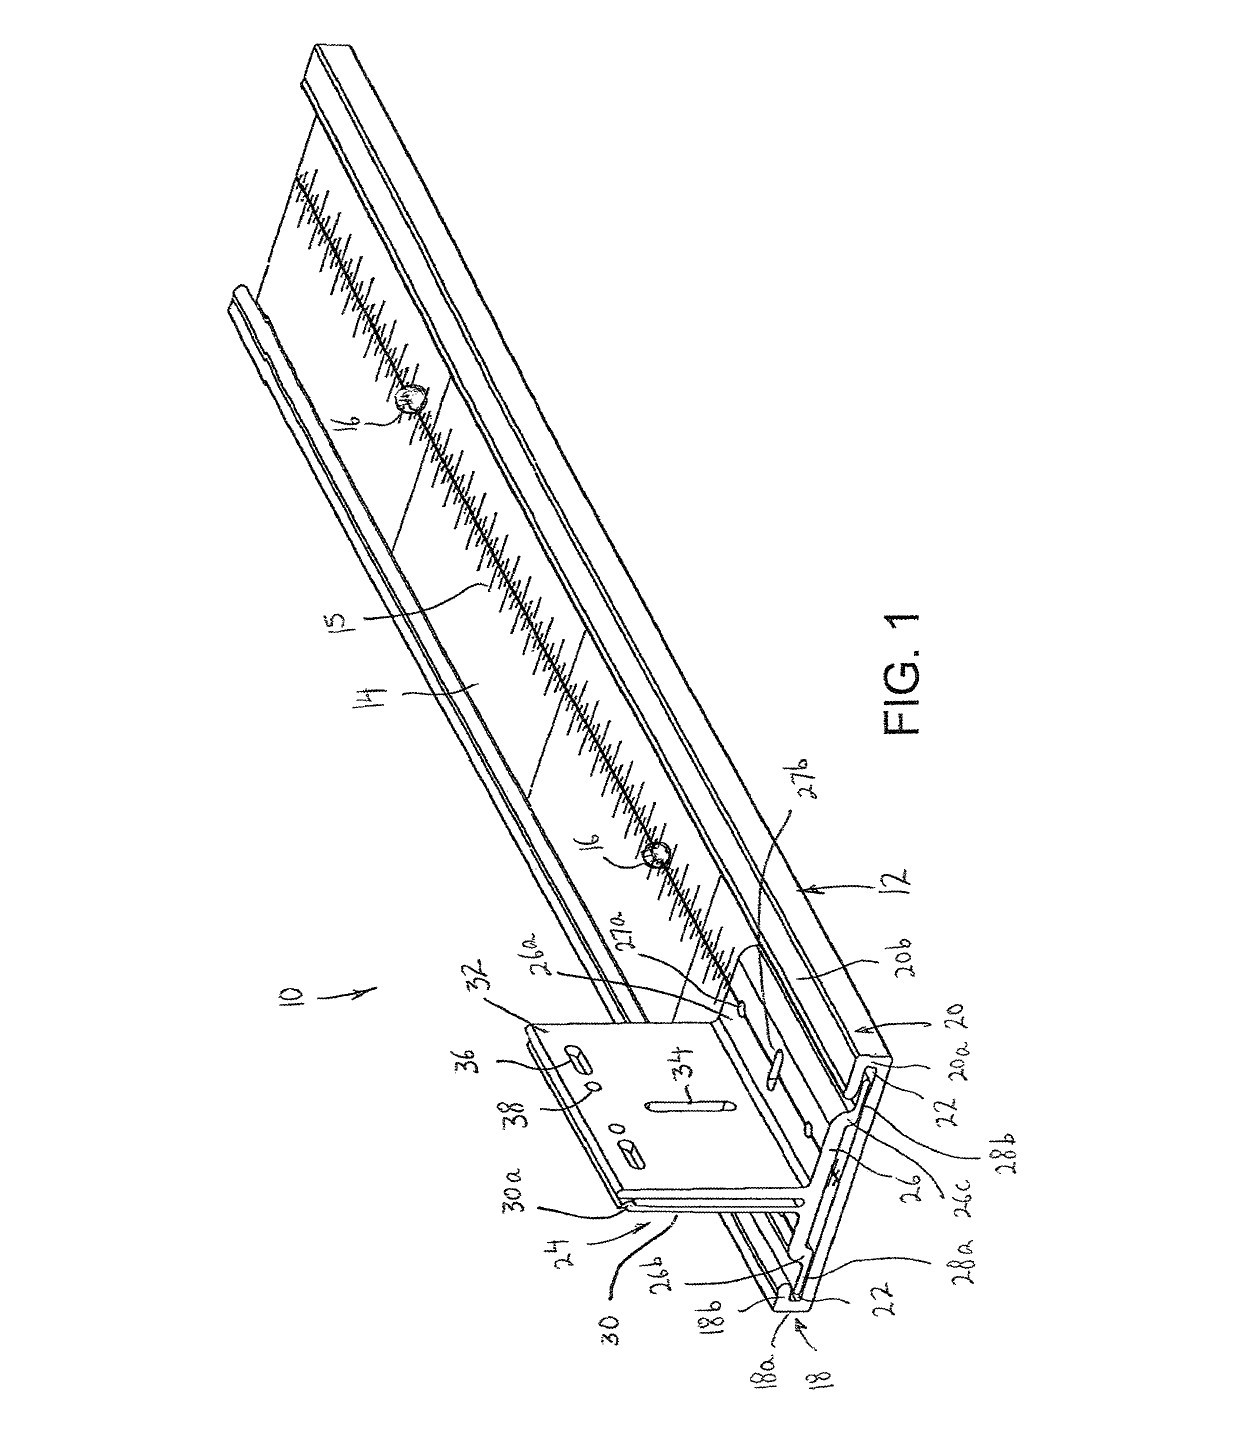 System for mounting wall panels to a wall